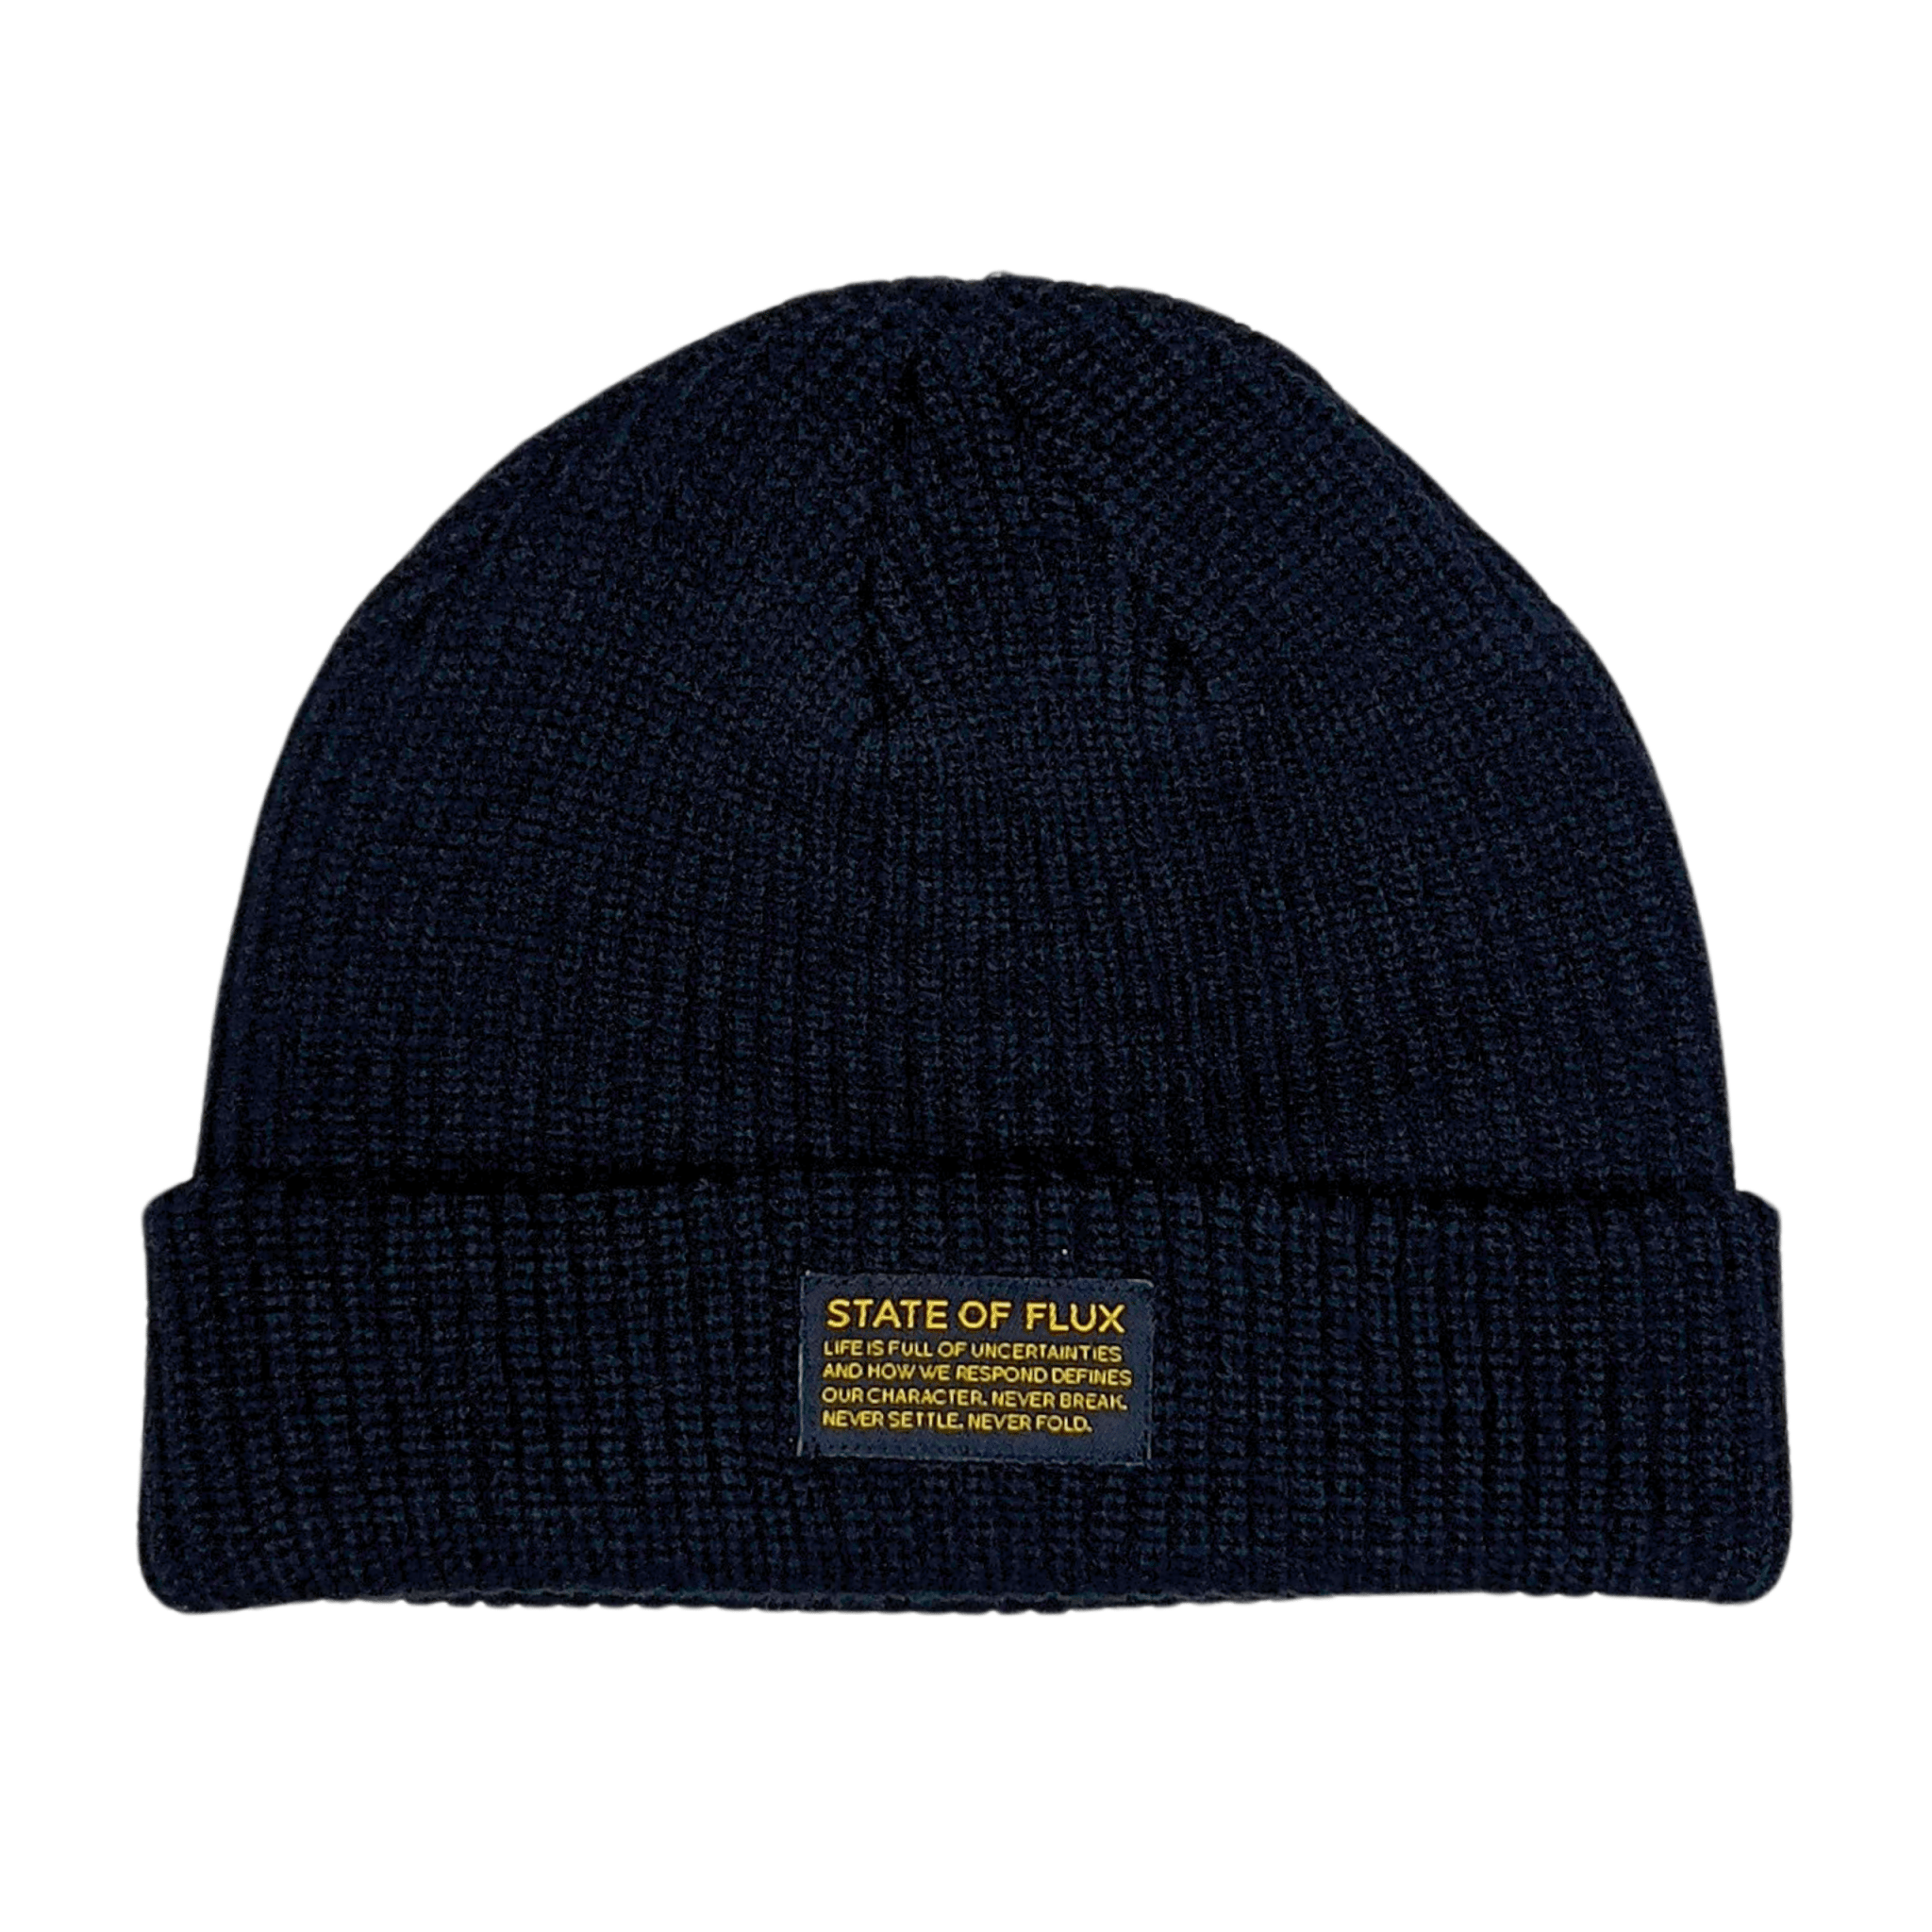 Short Knitted Mantra Beanie in black